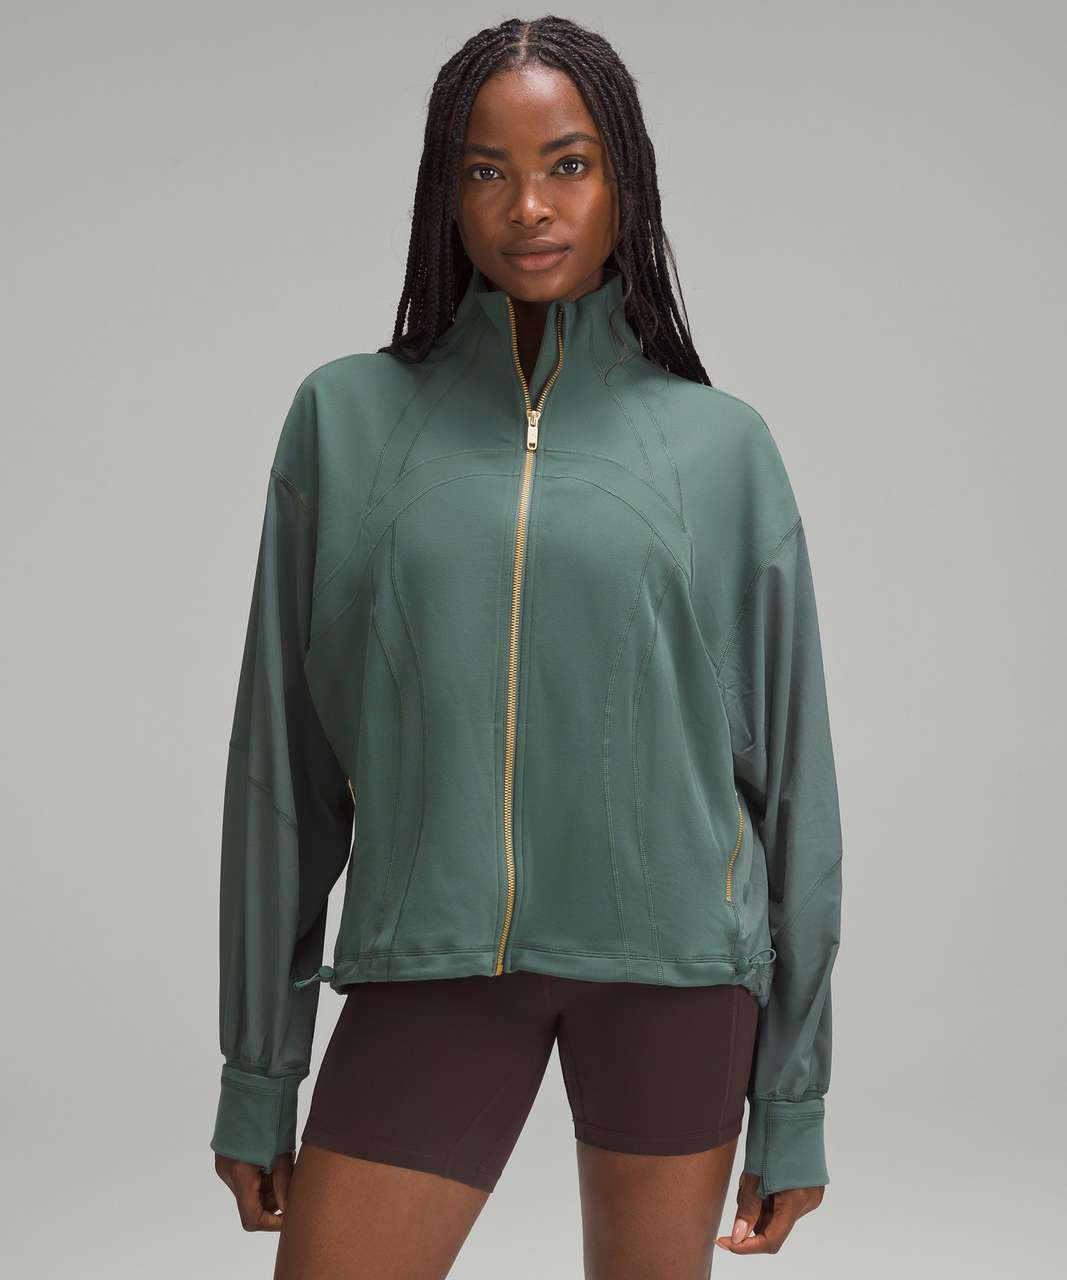 Fit Review Dark Forest Define Jacket, Train Time Crops - The Sweat Edit